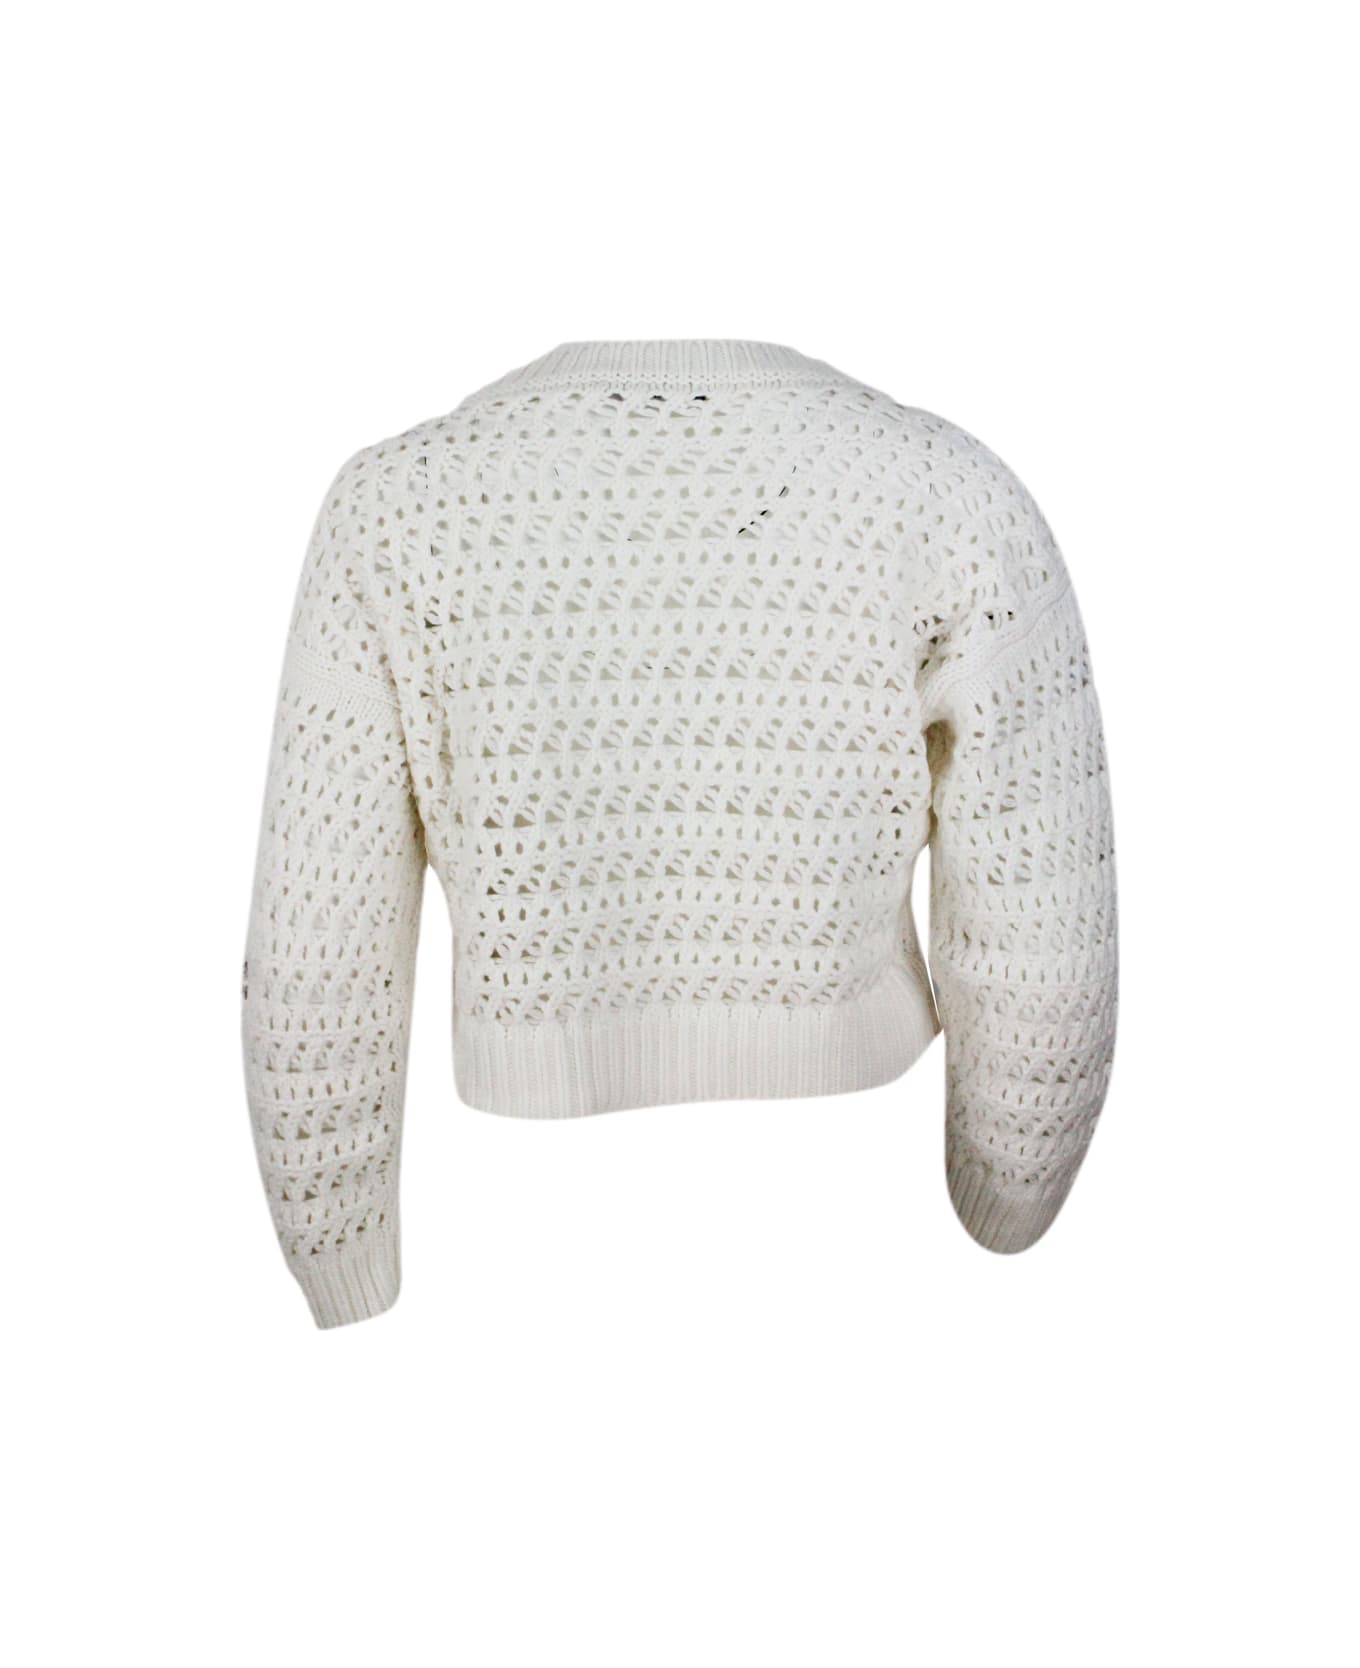 Fabiana Filippi Long-sleeved Round-neck Sweater In Platinum Wool, Silk And Cashmere Yarn With Embroidery And Chain Of Brilliant Jewels On The Front - cream